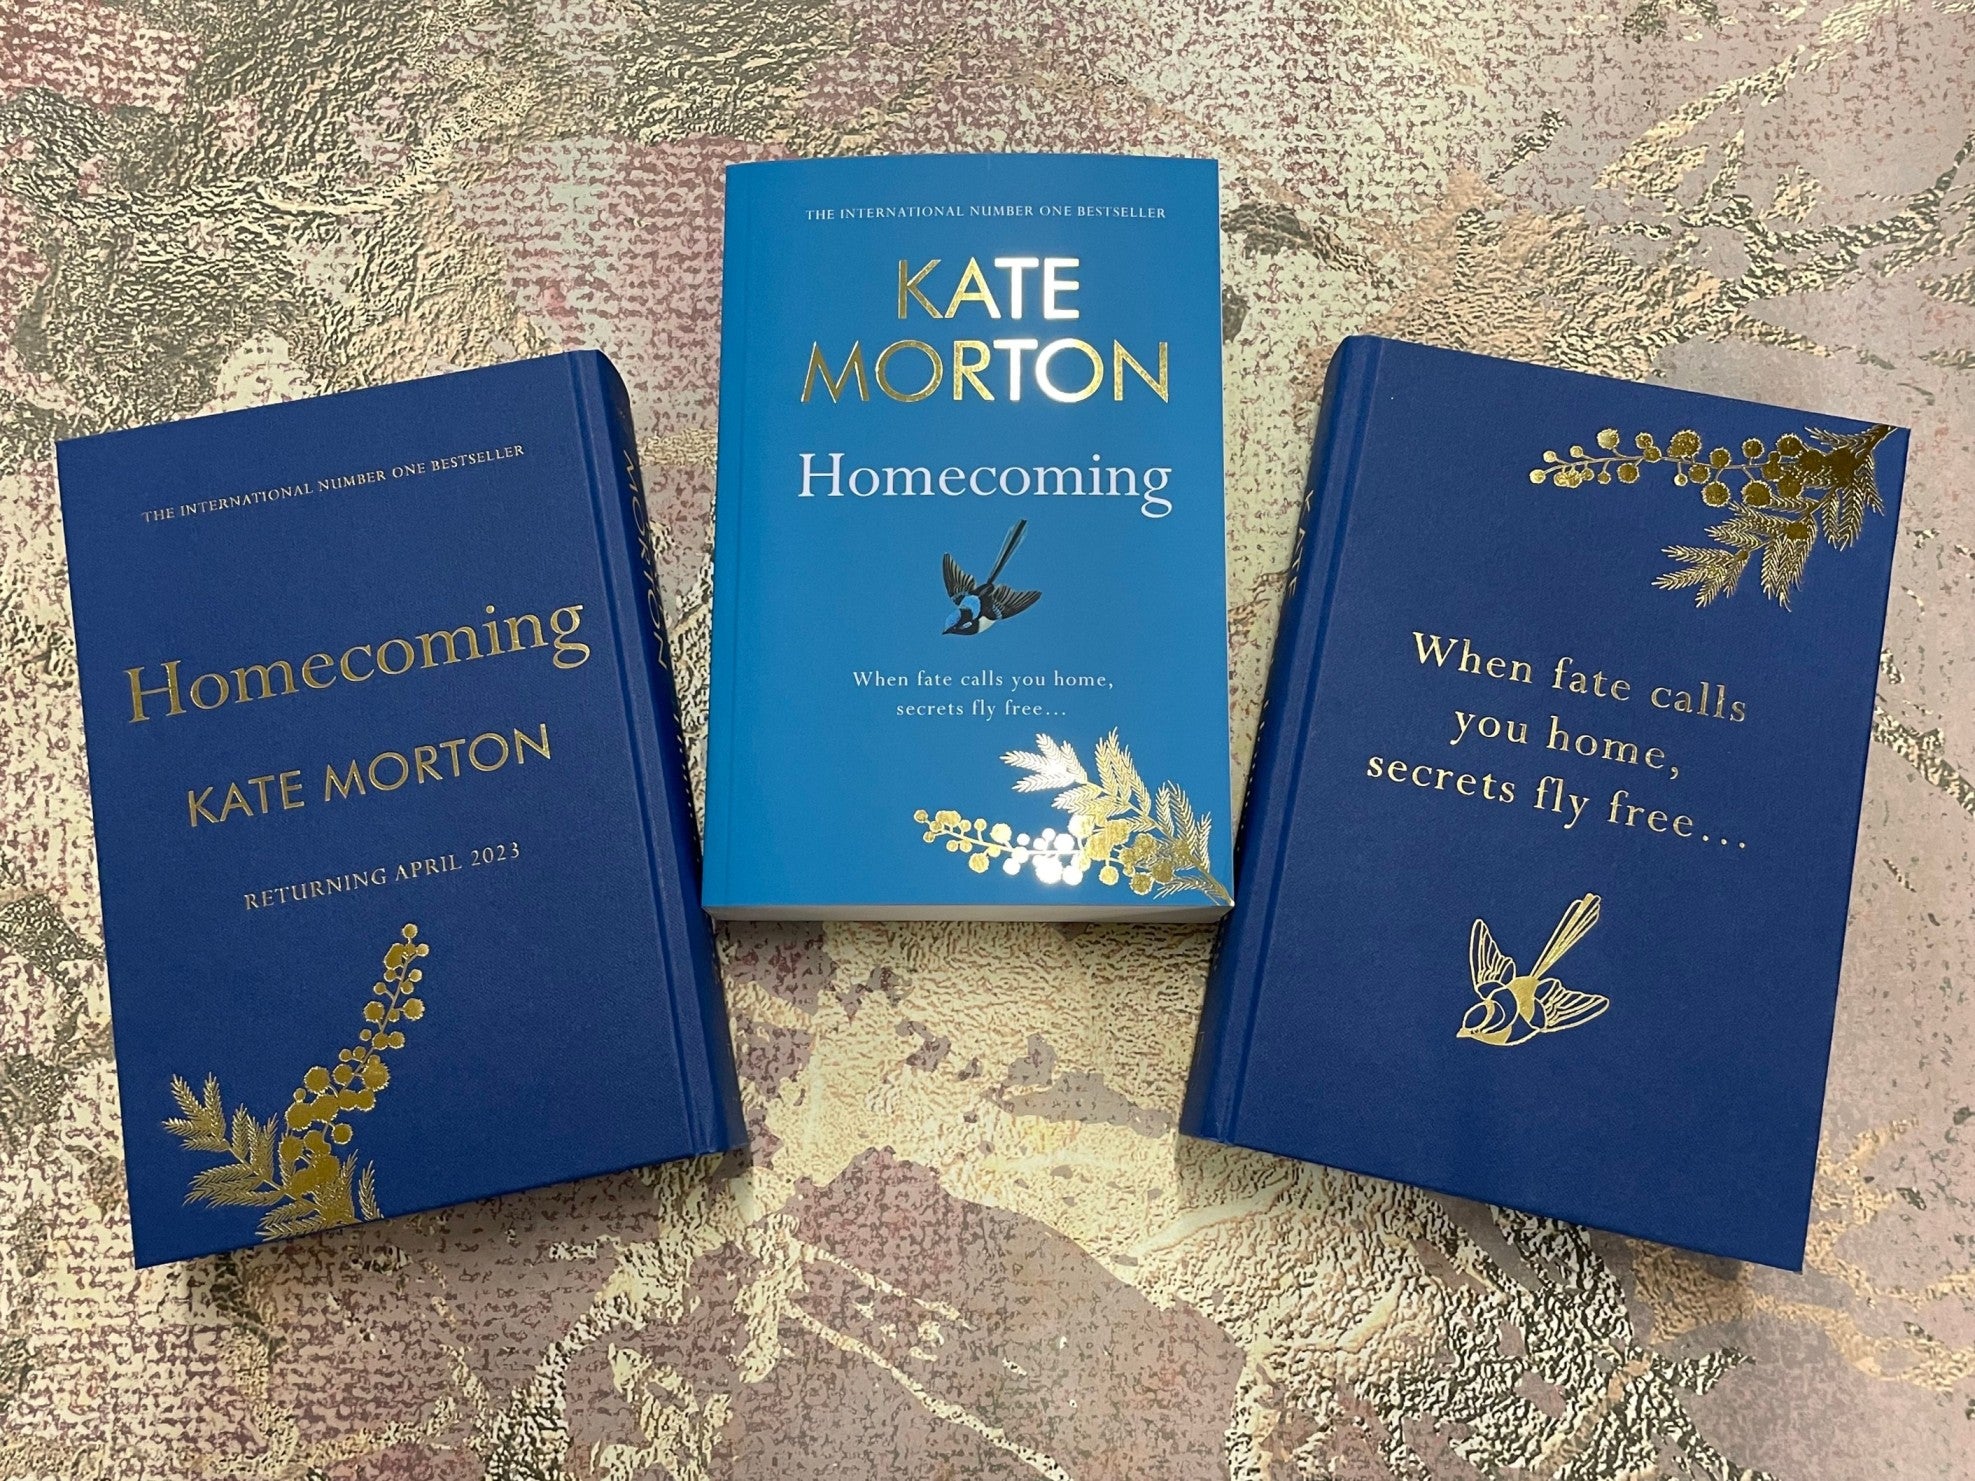 Two hardback proofs of Homecoming by Kate Morton beside a paperback proof.